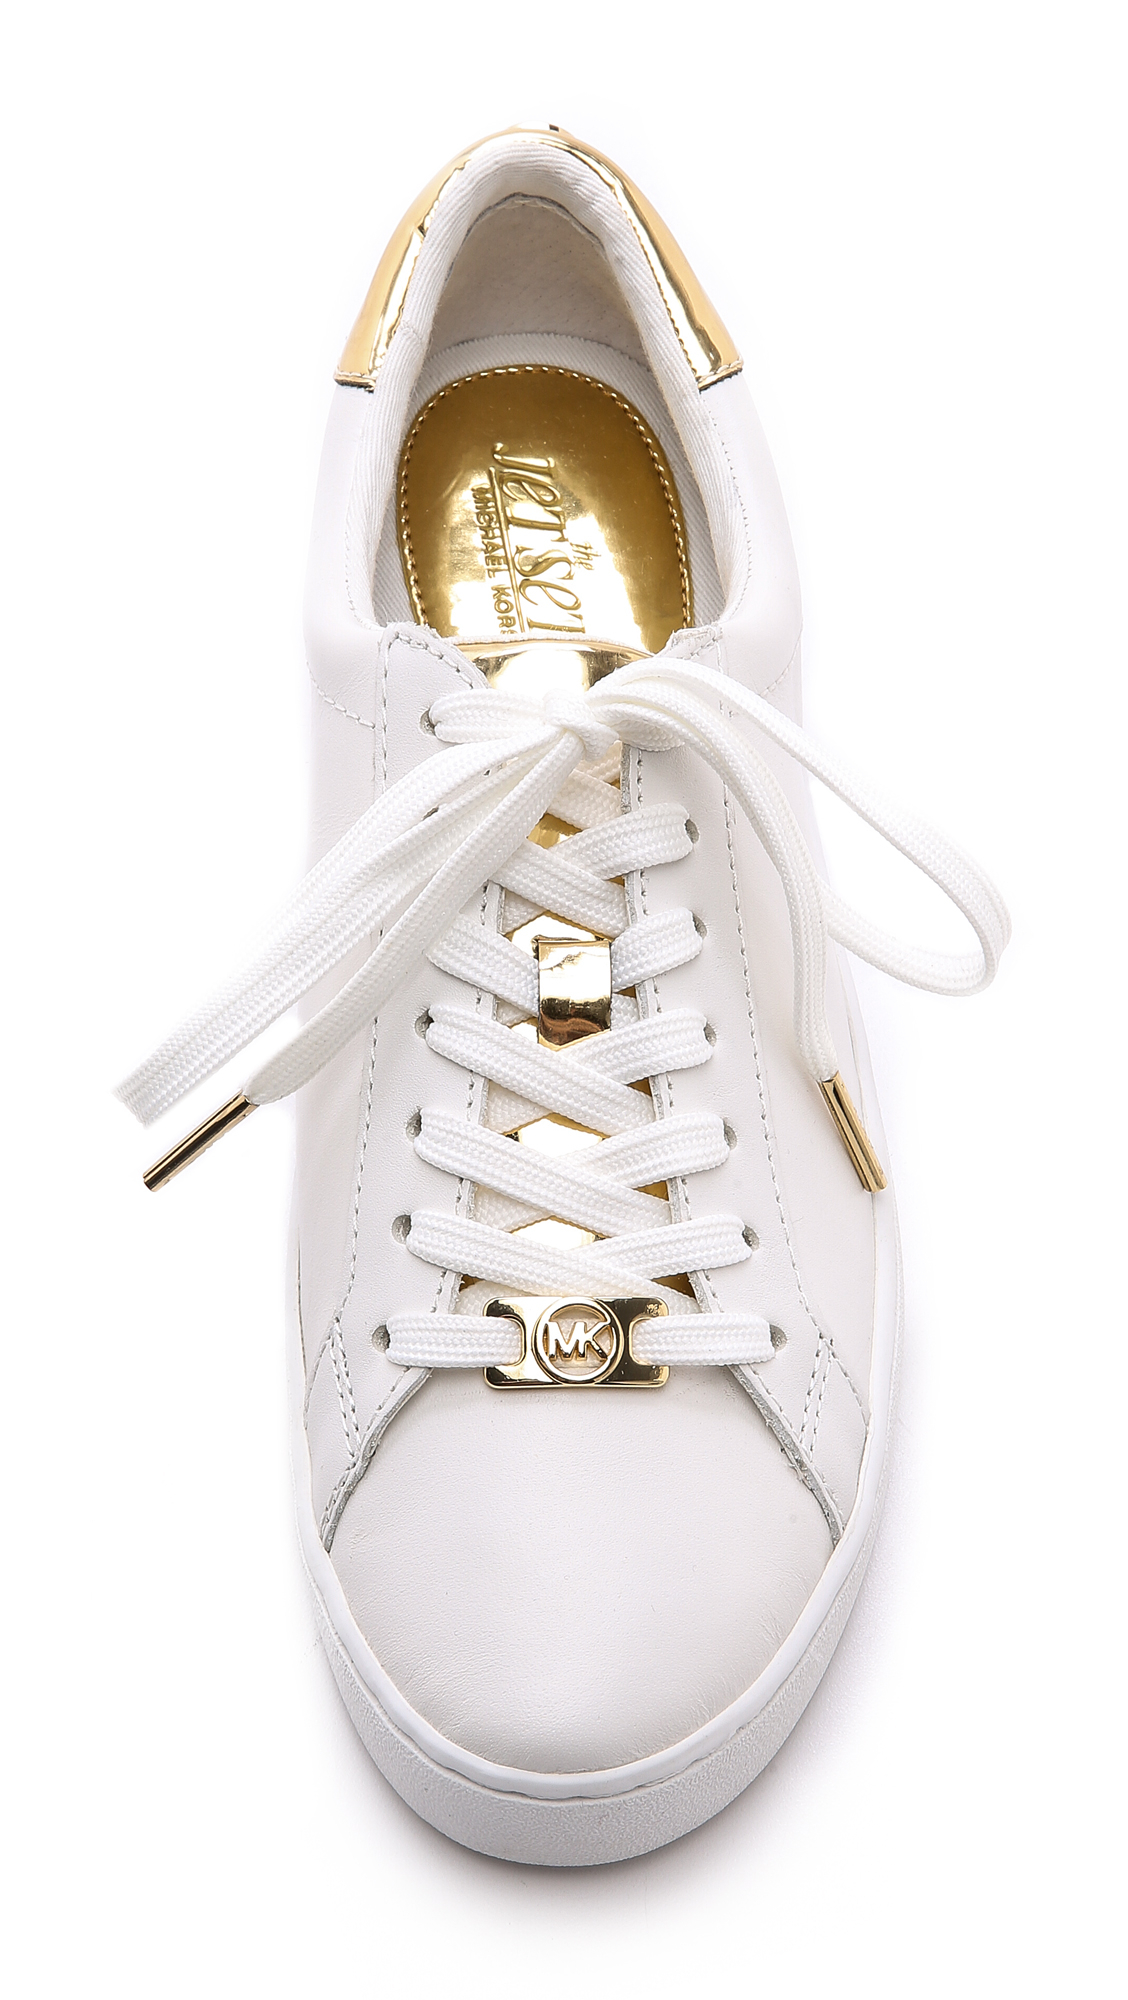 MICHAEL Michael Kors Irving Lace Up Sneakers - Optic/Pale Gold in 